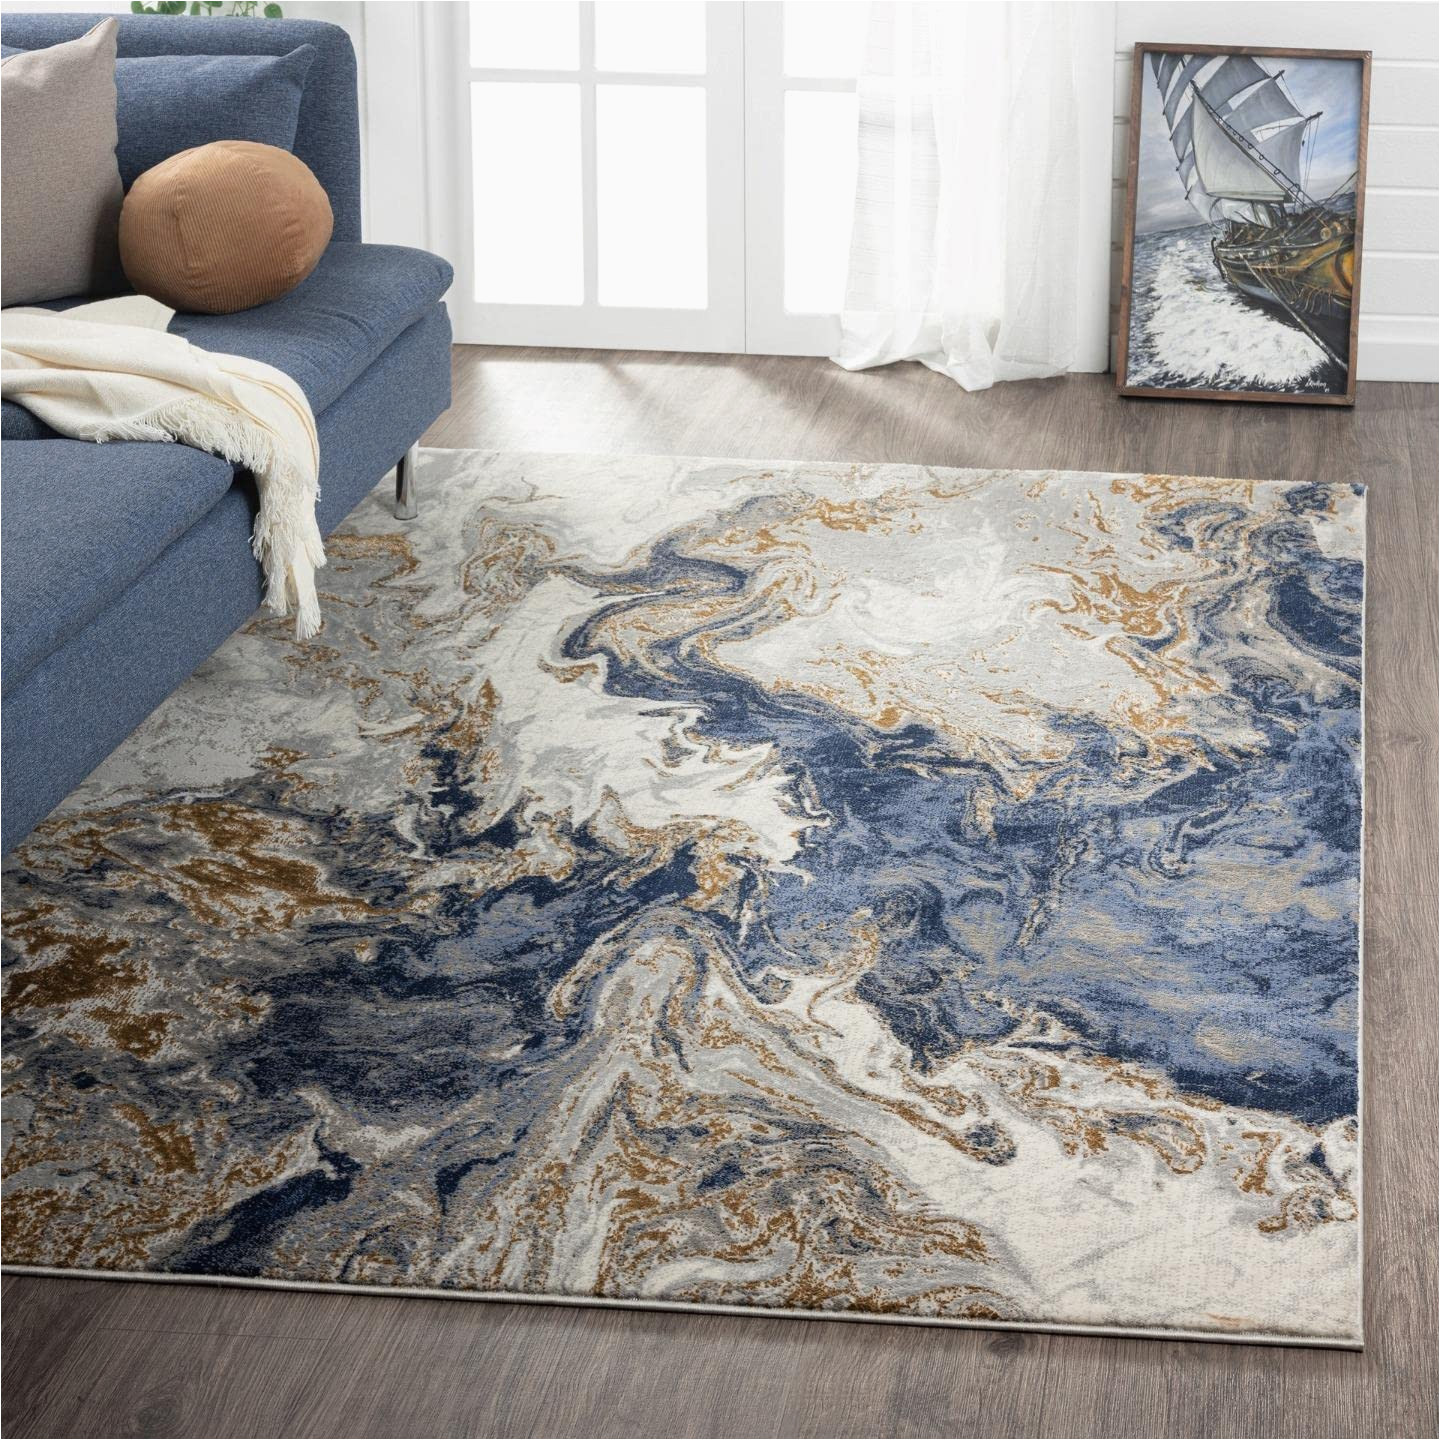 Blue Swirl area Rug Luxe Weavers Marble Collection Blue area Rug 5×7 Modern Abstract Swirl Design Non-shedding Carpet